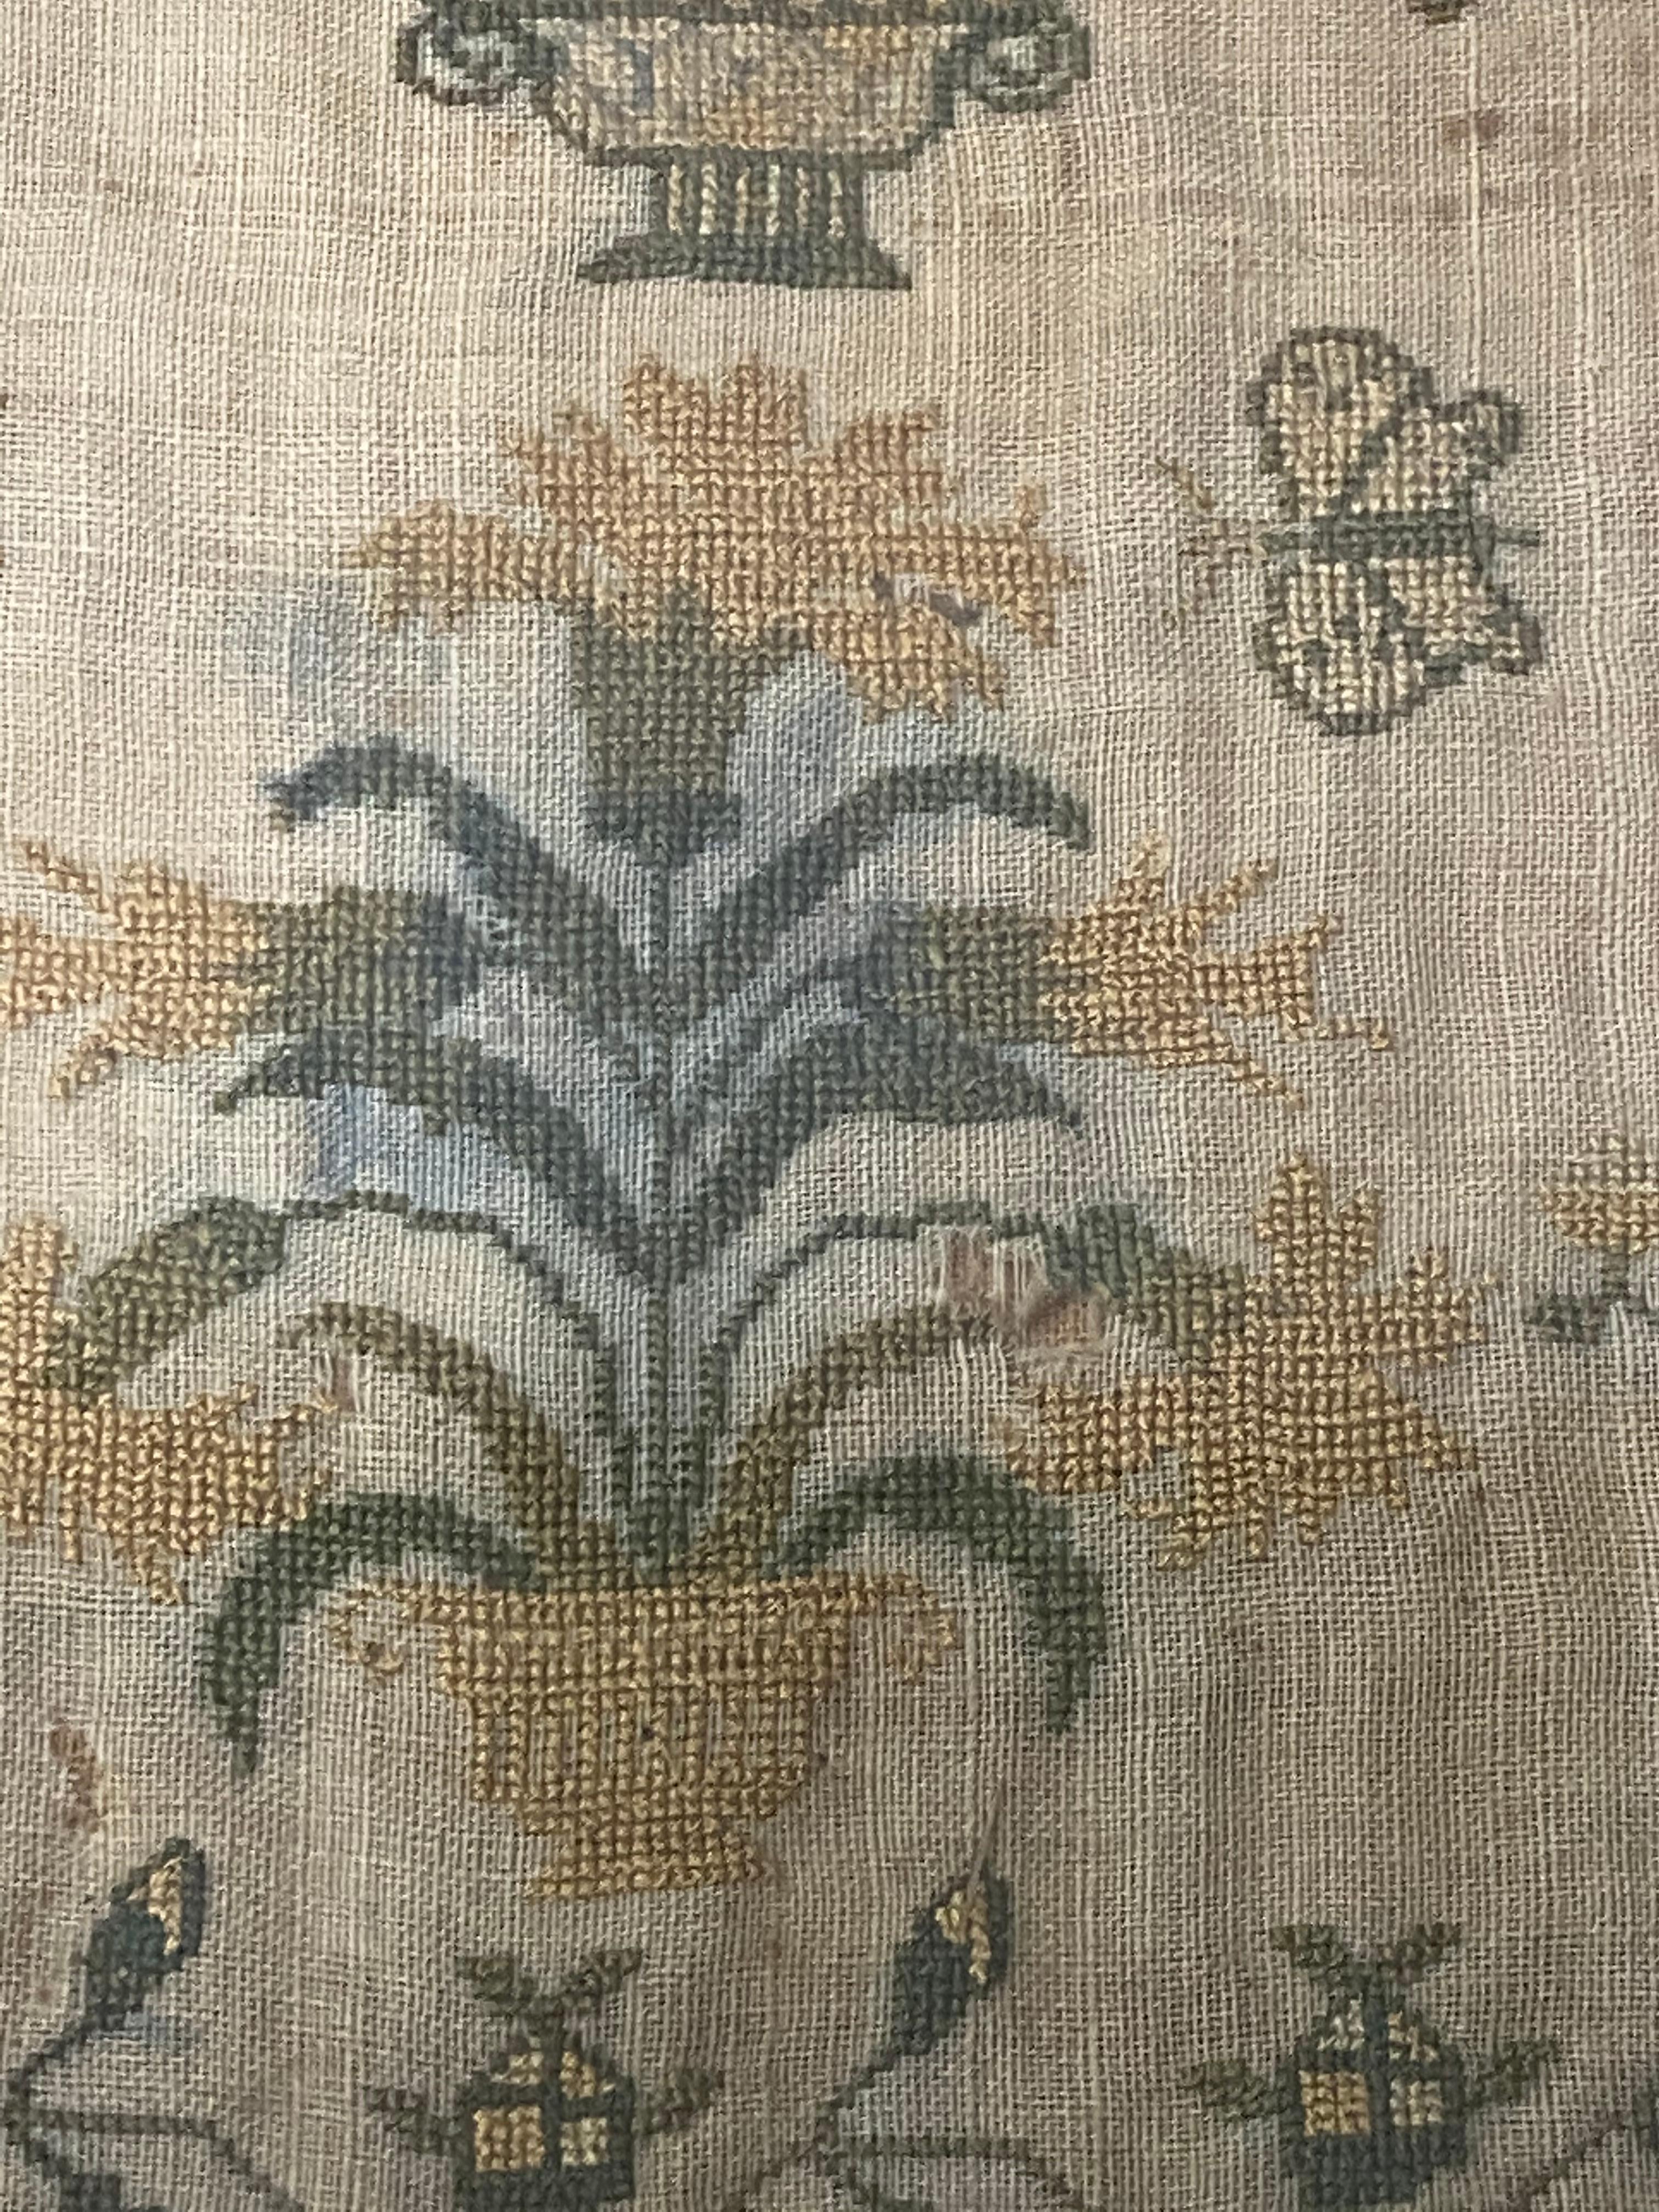 Textile Mid-19th Century Sampler by Jane Richards Aged 10 Years, 1845